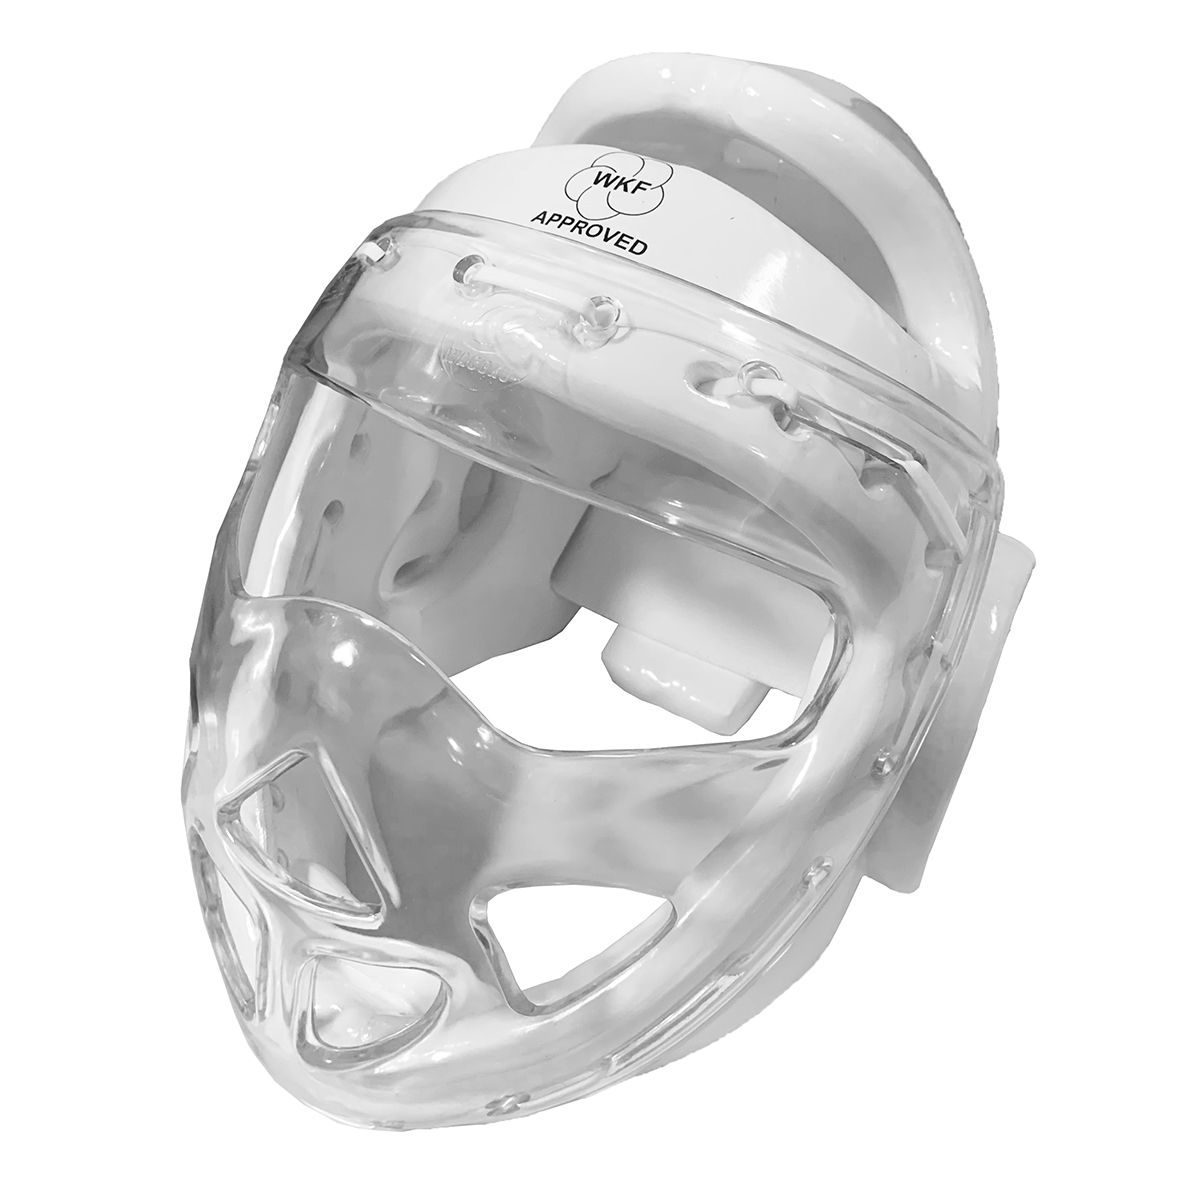 WKF Karate Comeptition Approved White Head Guard - Click Image to Close